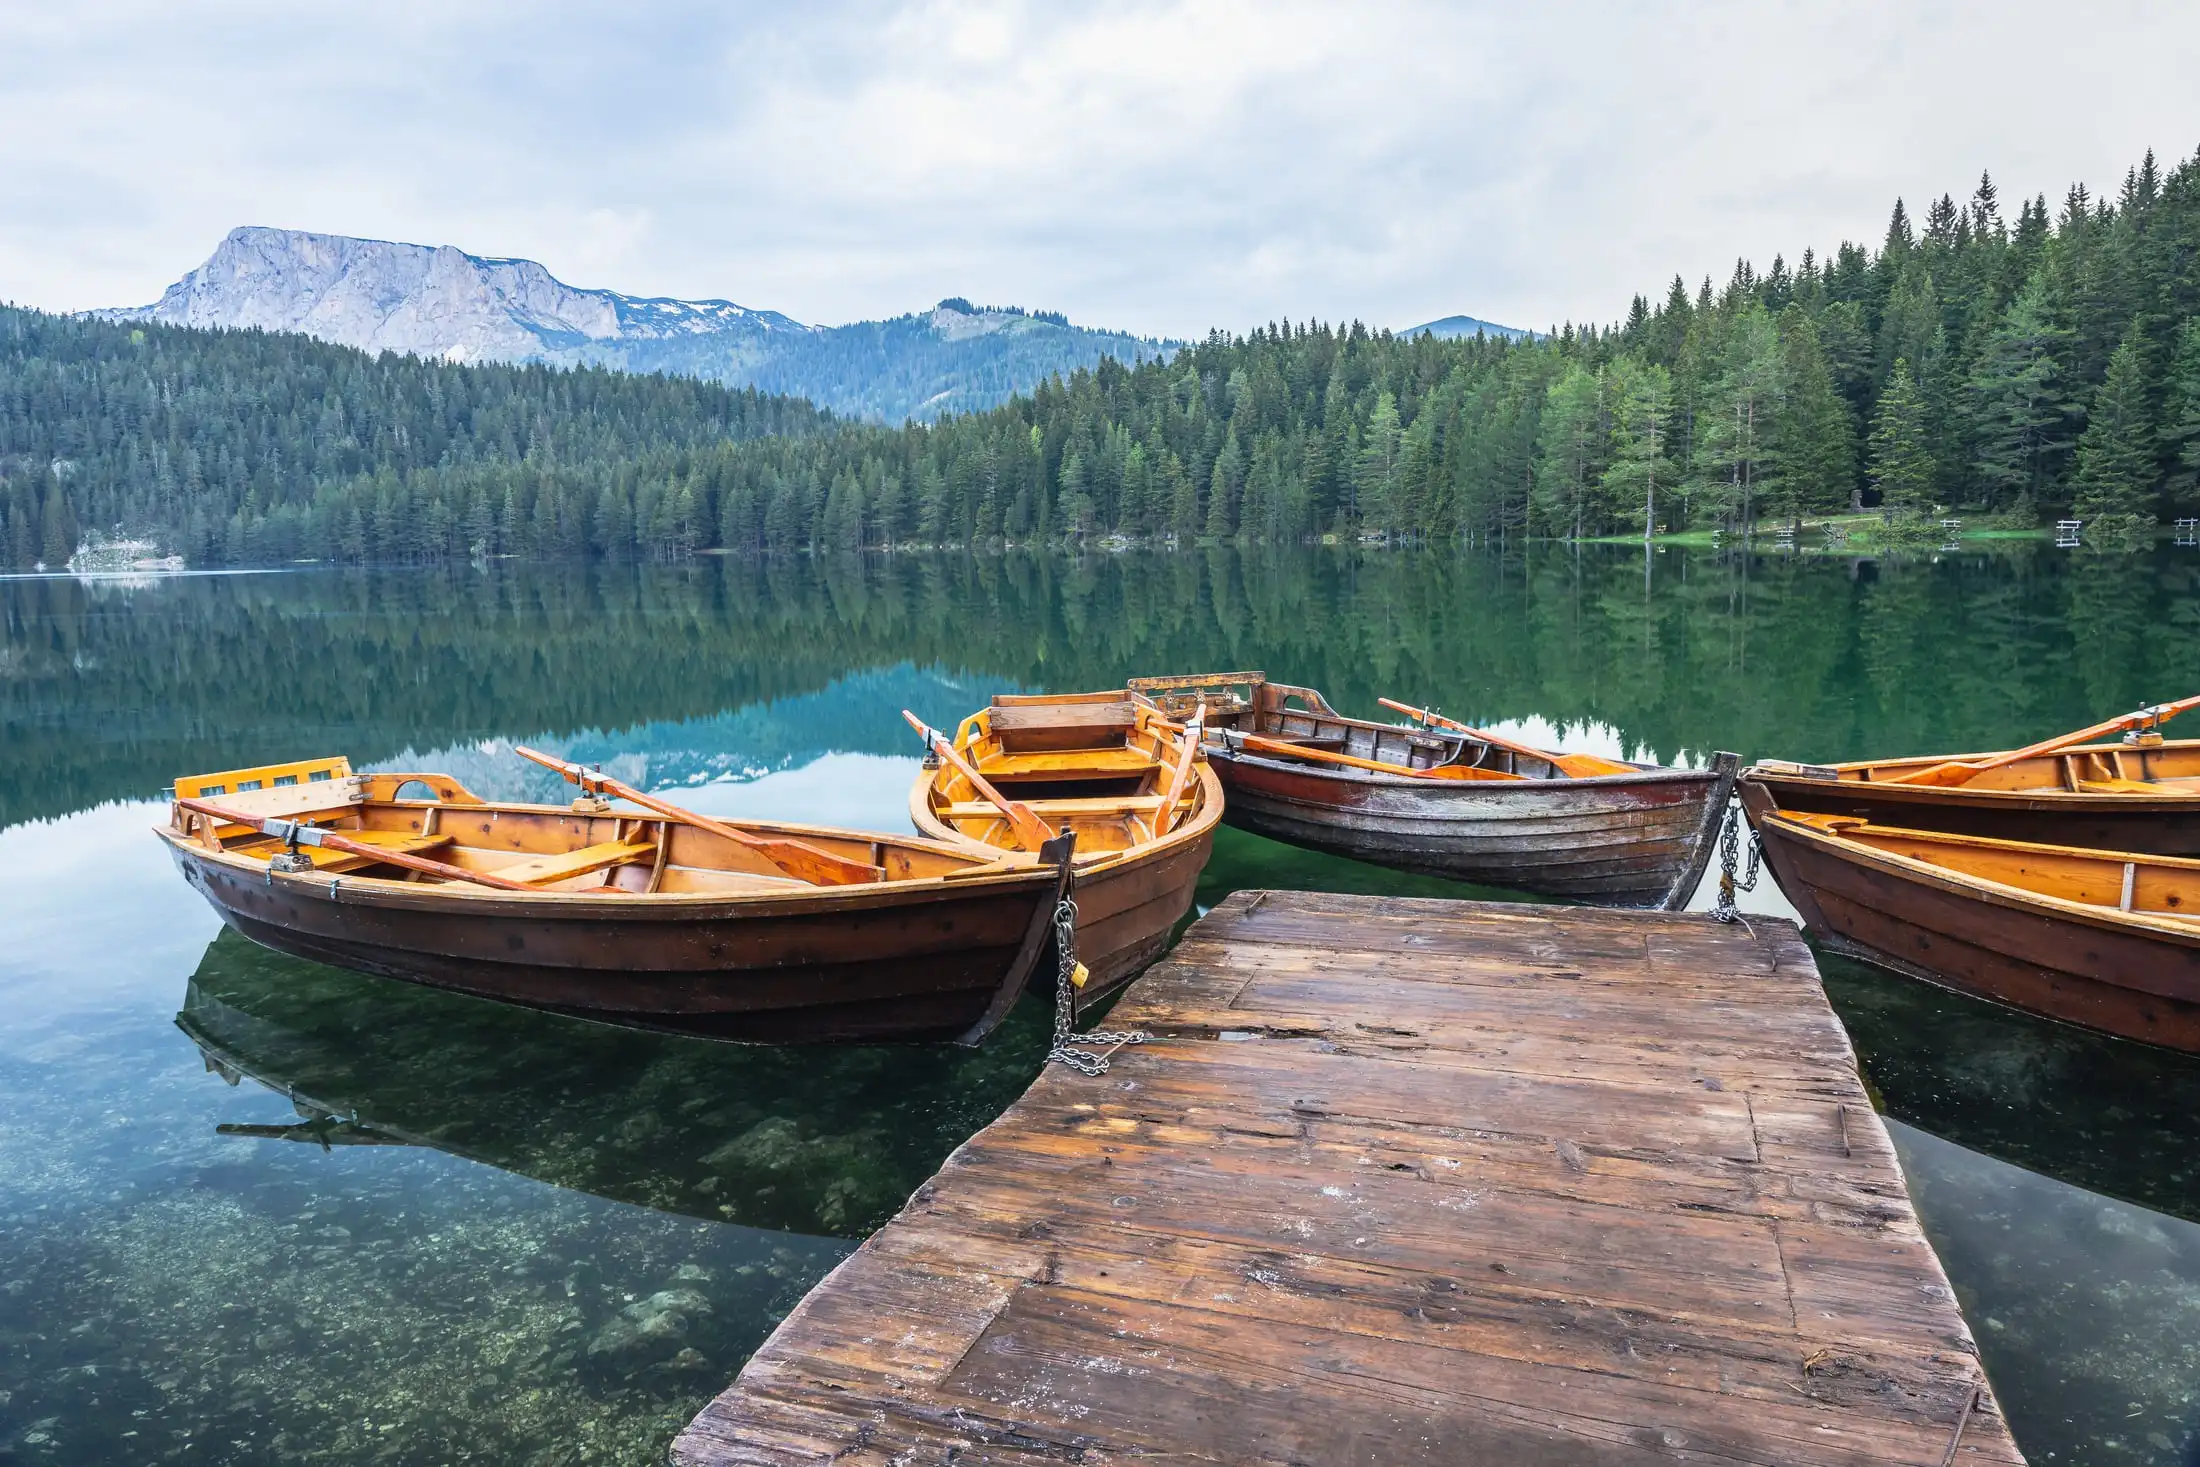 Docked boats in Black Lake on Durmitor